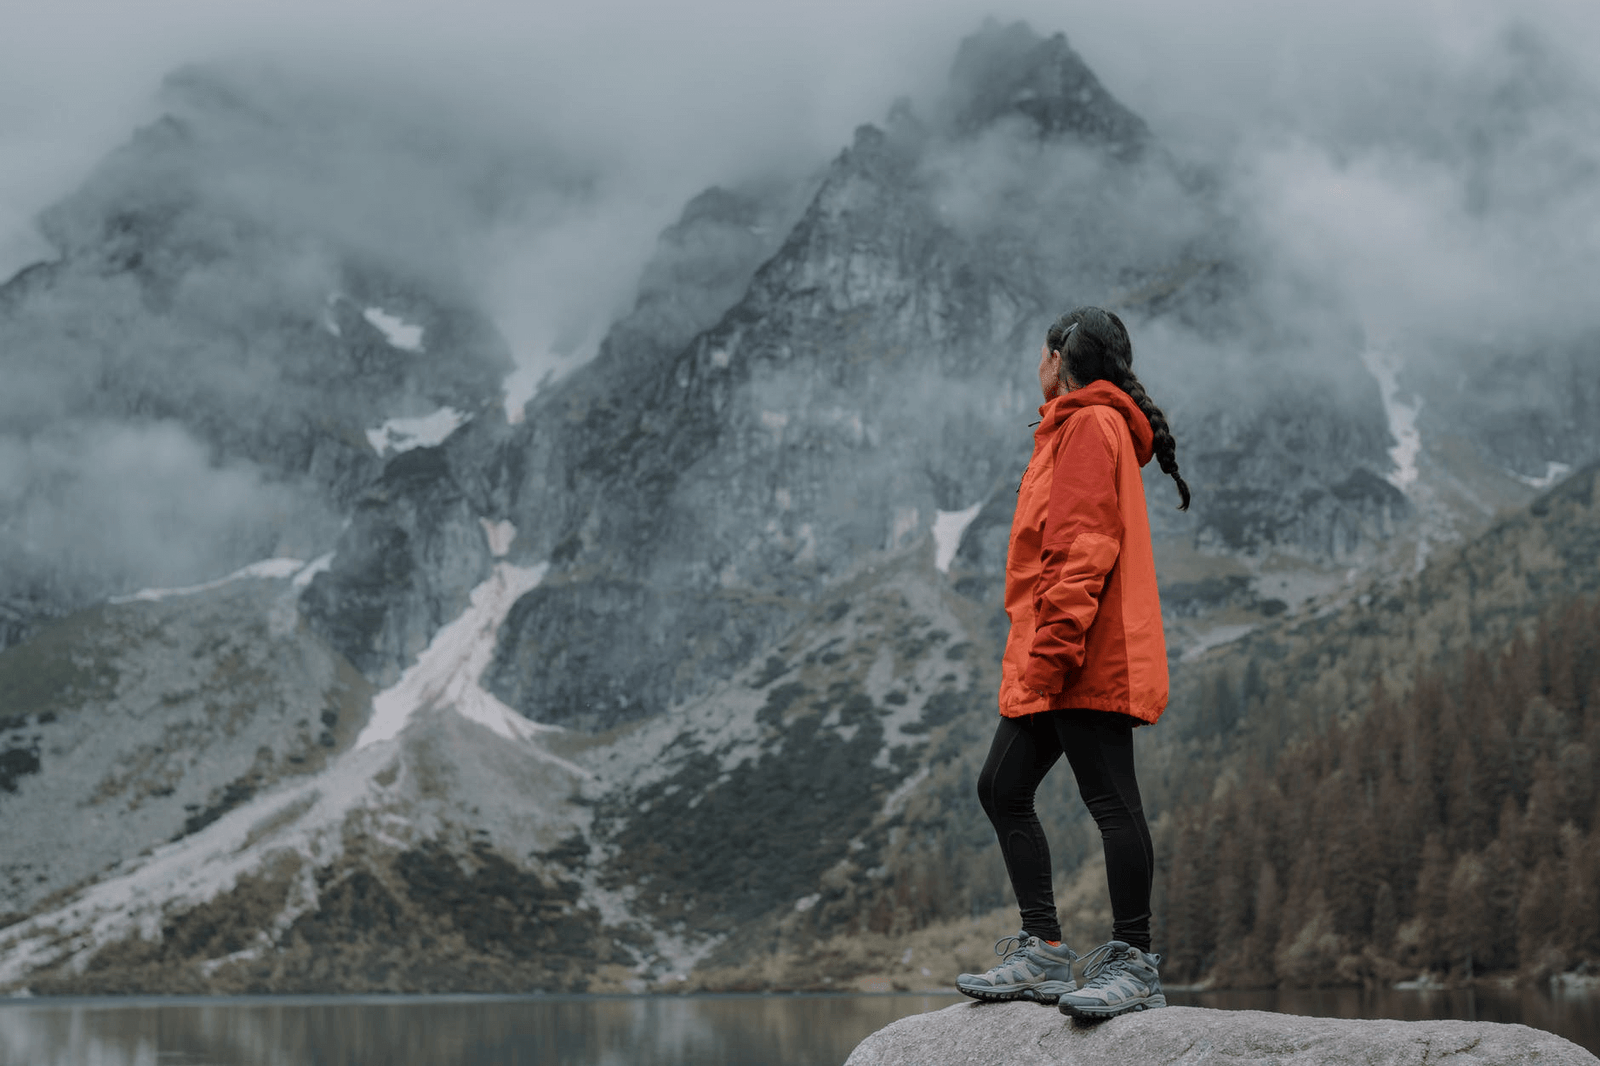 Why Should I Be Picky About My Hiking Shoes